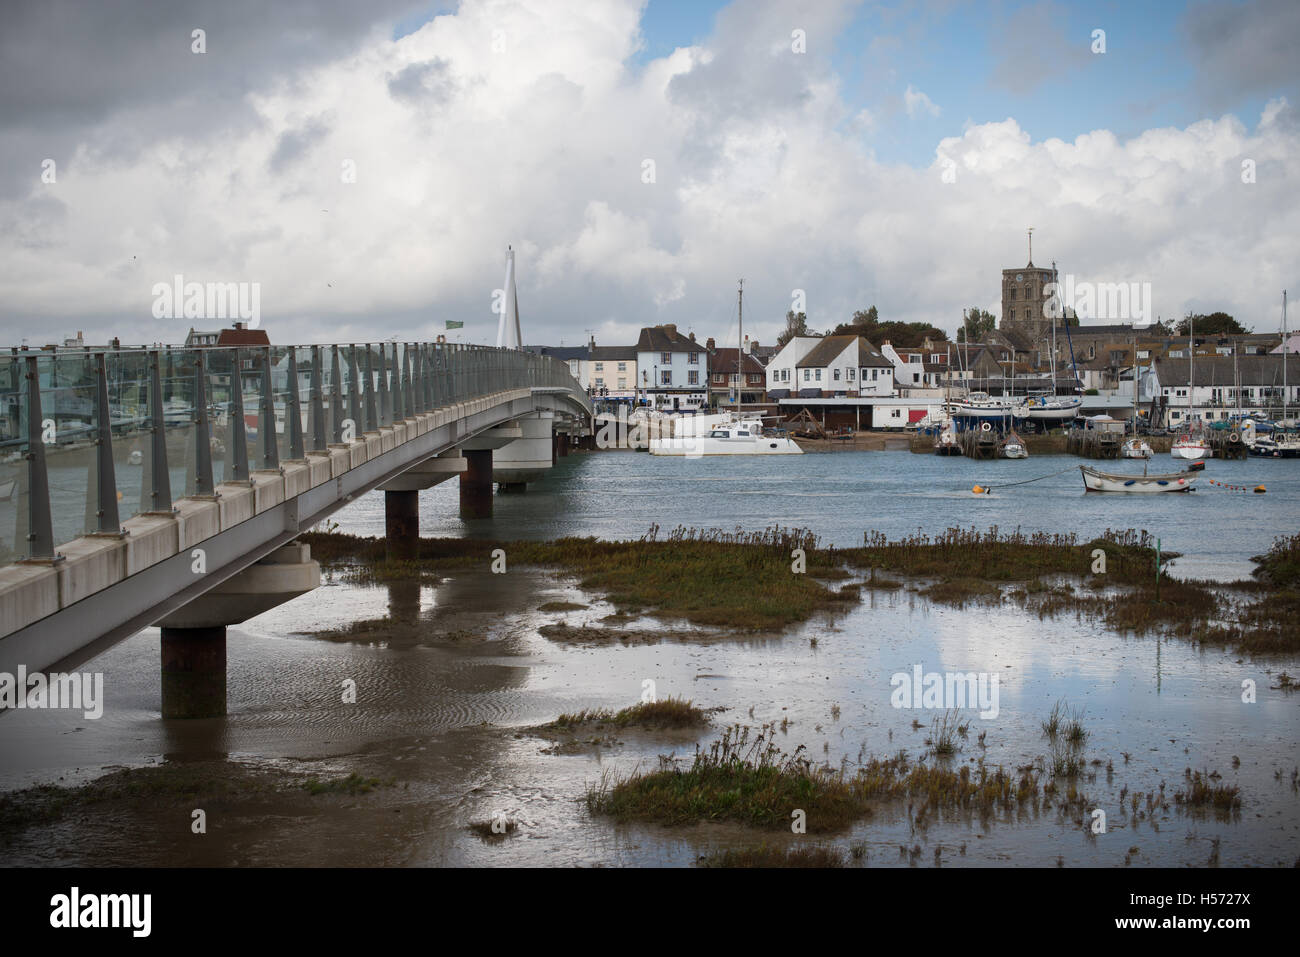 The Adur Ferry Bridge connects Shoreham-by-Sea to Shoreham Beach in West Sussex, England. Stock Photo